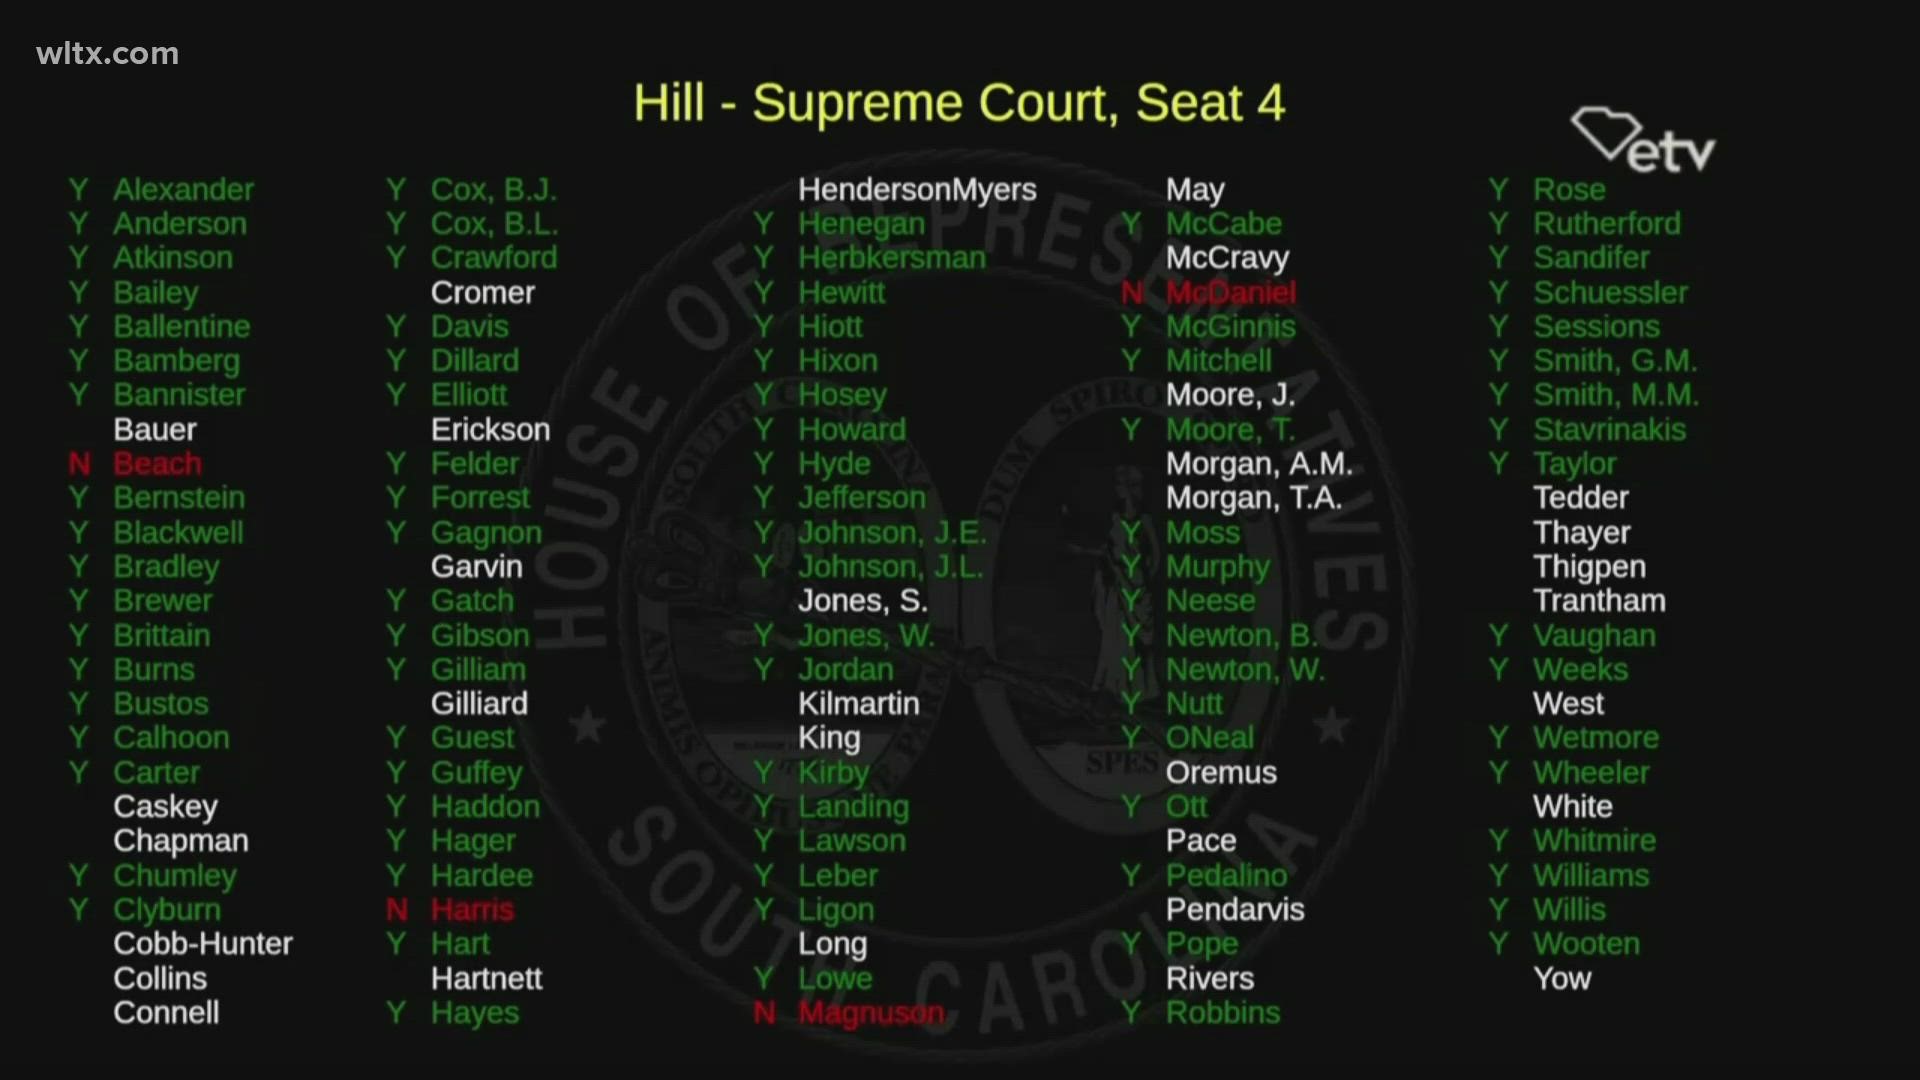 Gary Hill was voted as the new justice on the court. This makes all the justice's on the court male.